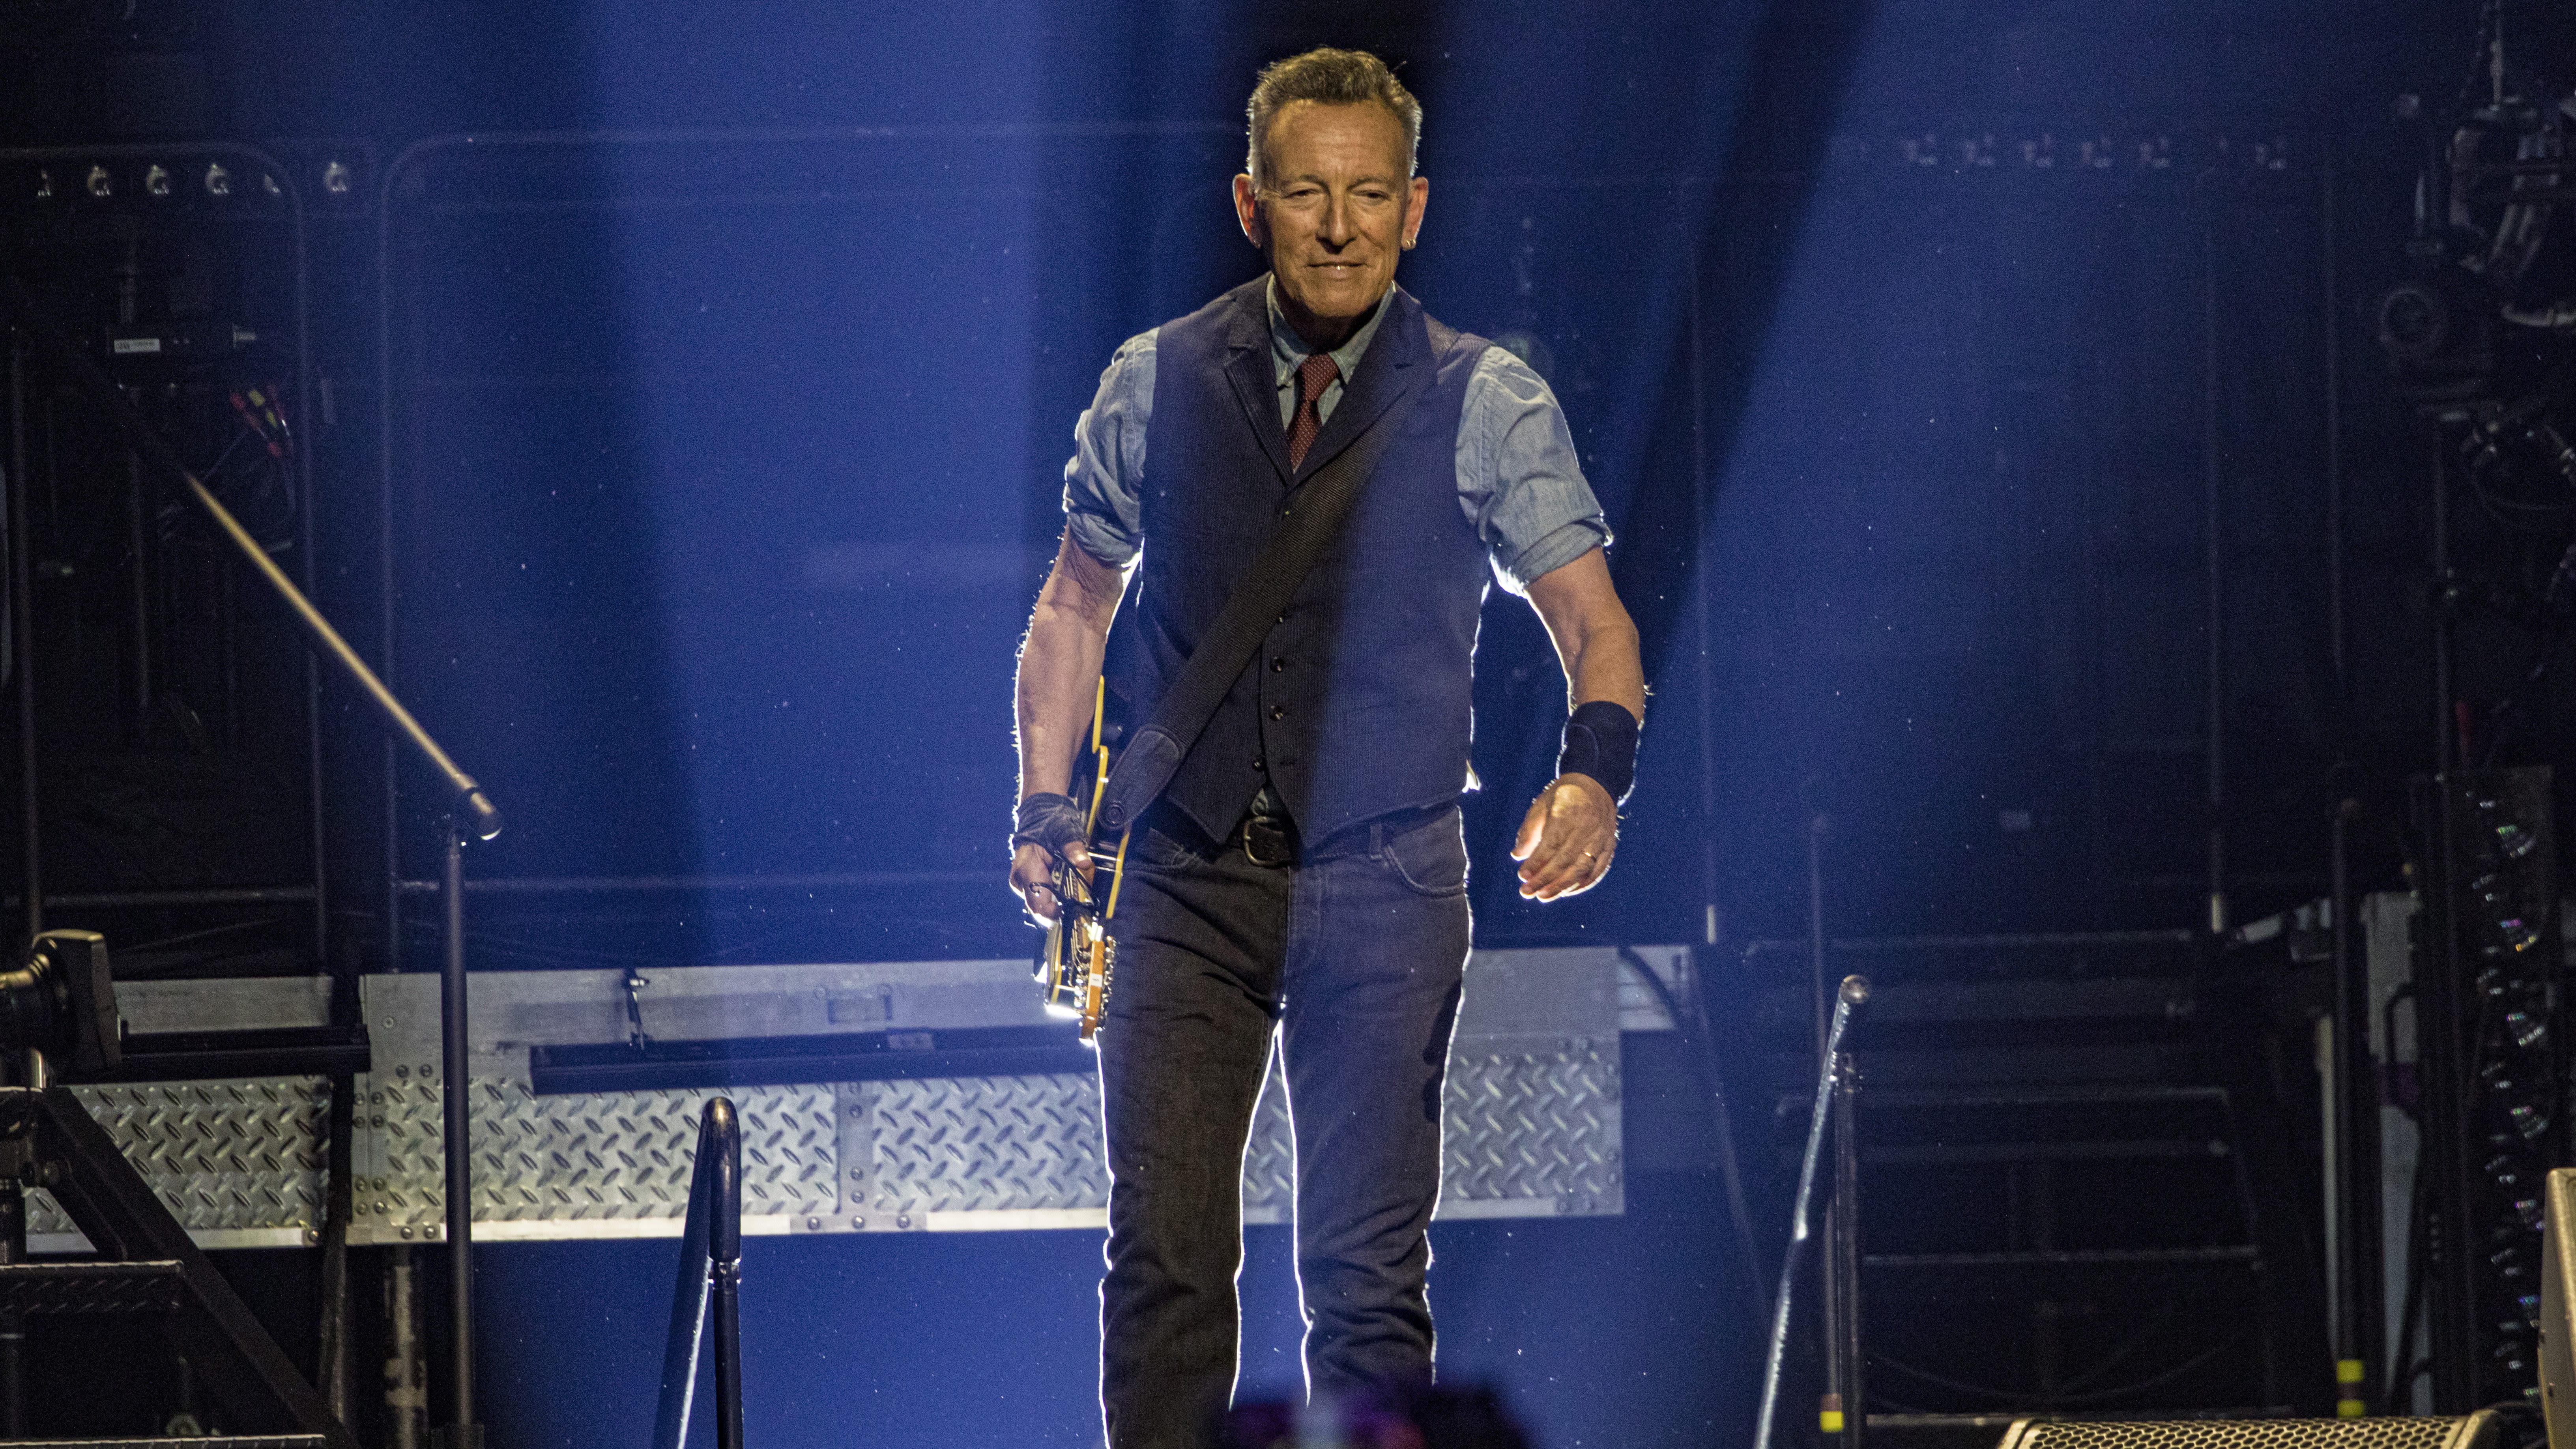 ...Springsteen Archives and Center for American Music Honor John Mellencamp, Jackson Browne, Mavis Staples and Dion DiMucci in New...